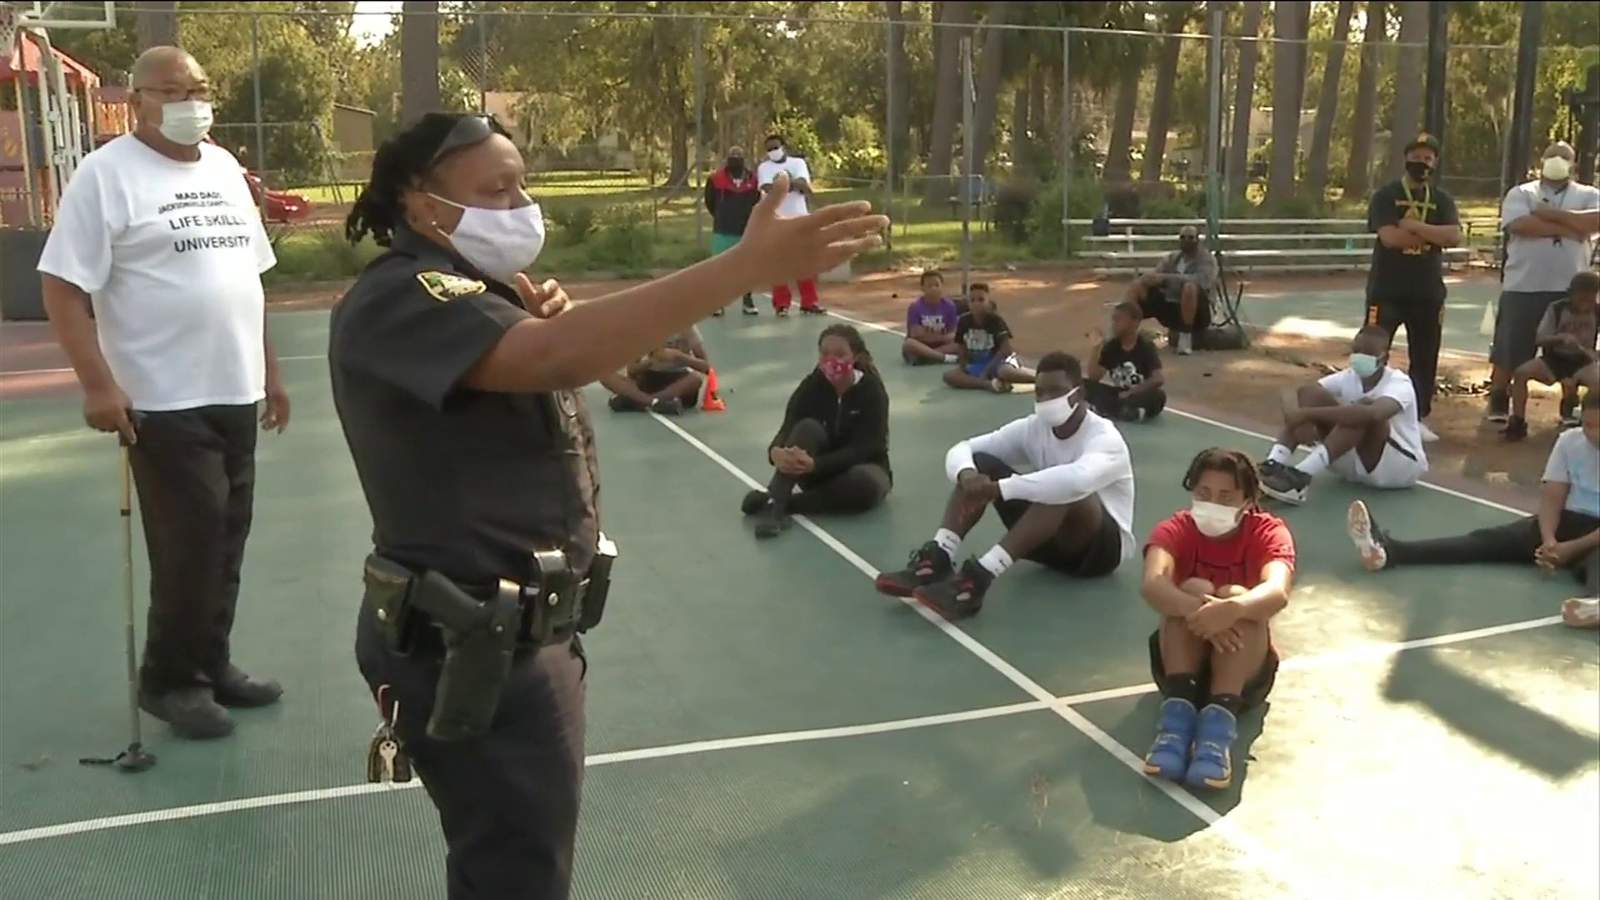 JSO officers hope to inspire youth, build positive relationships